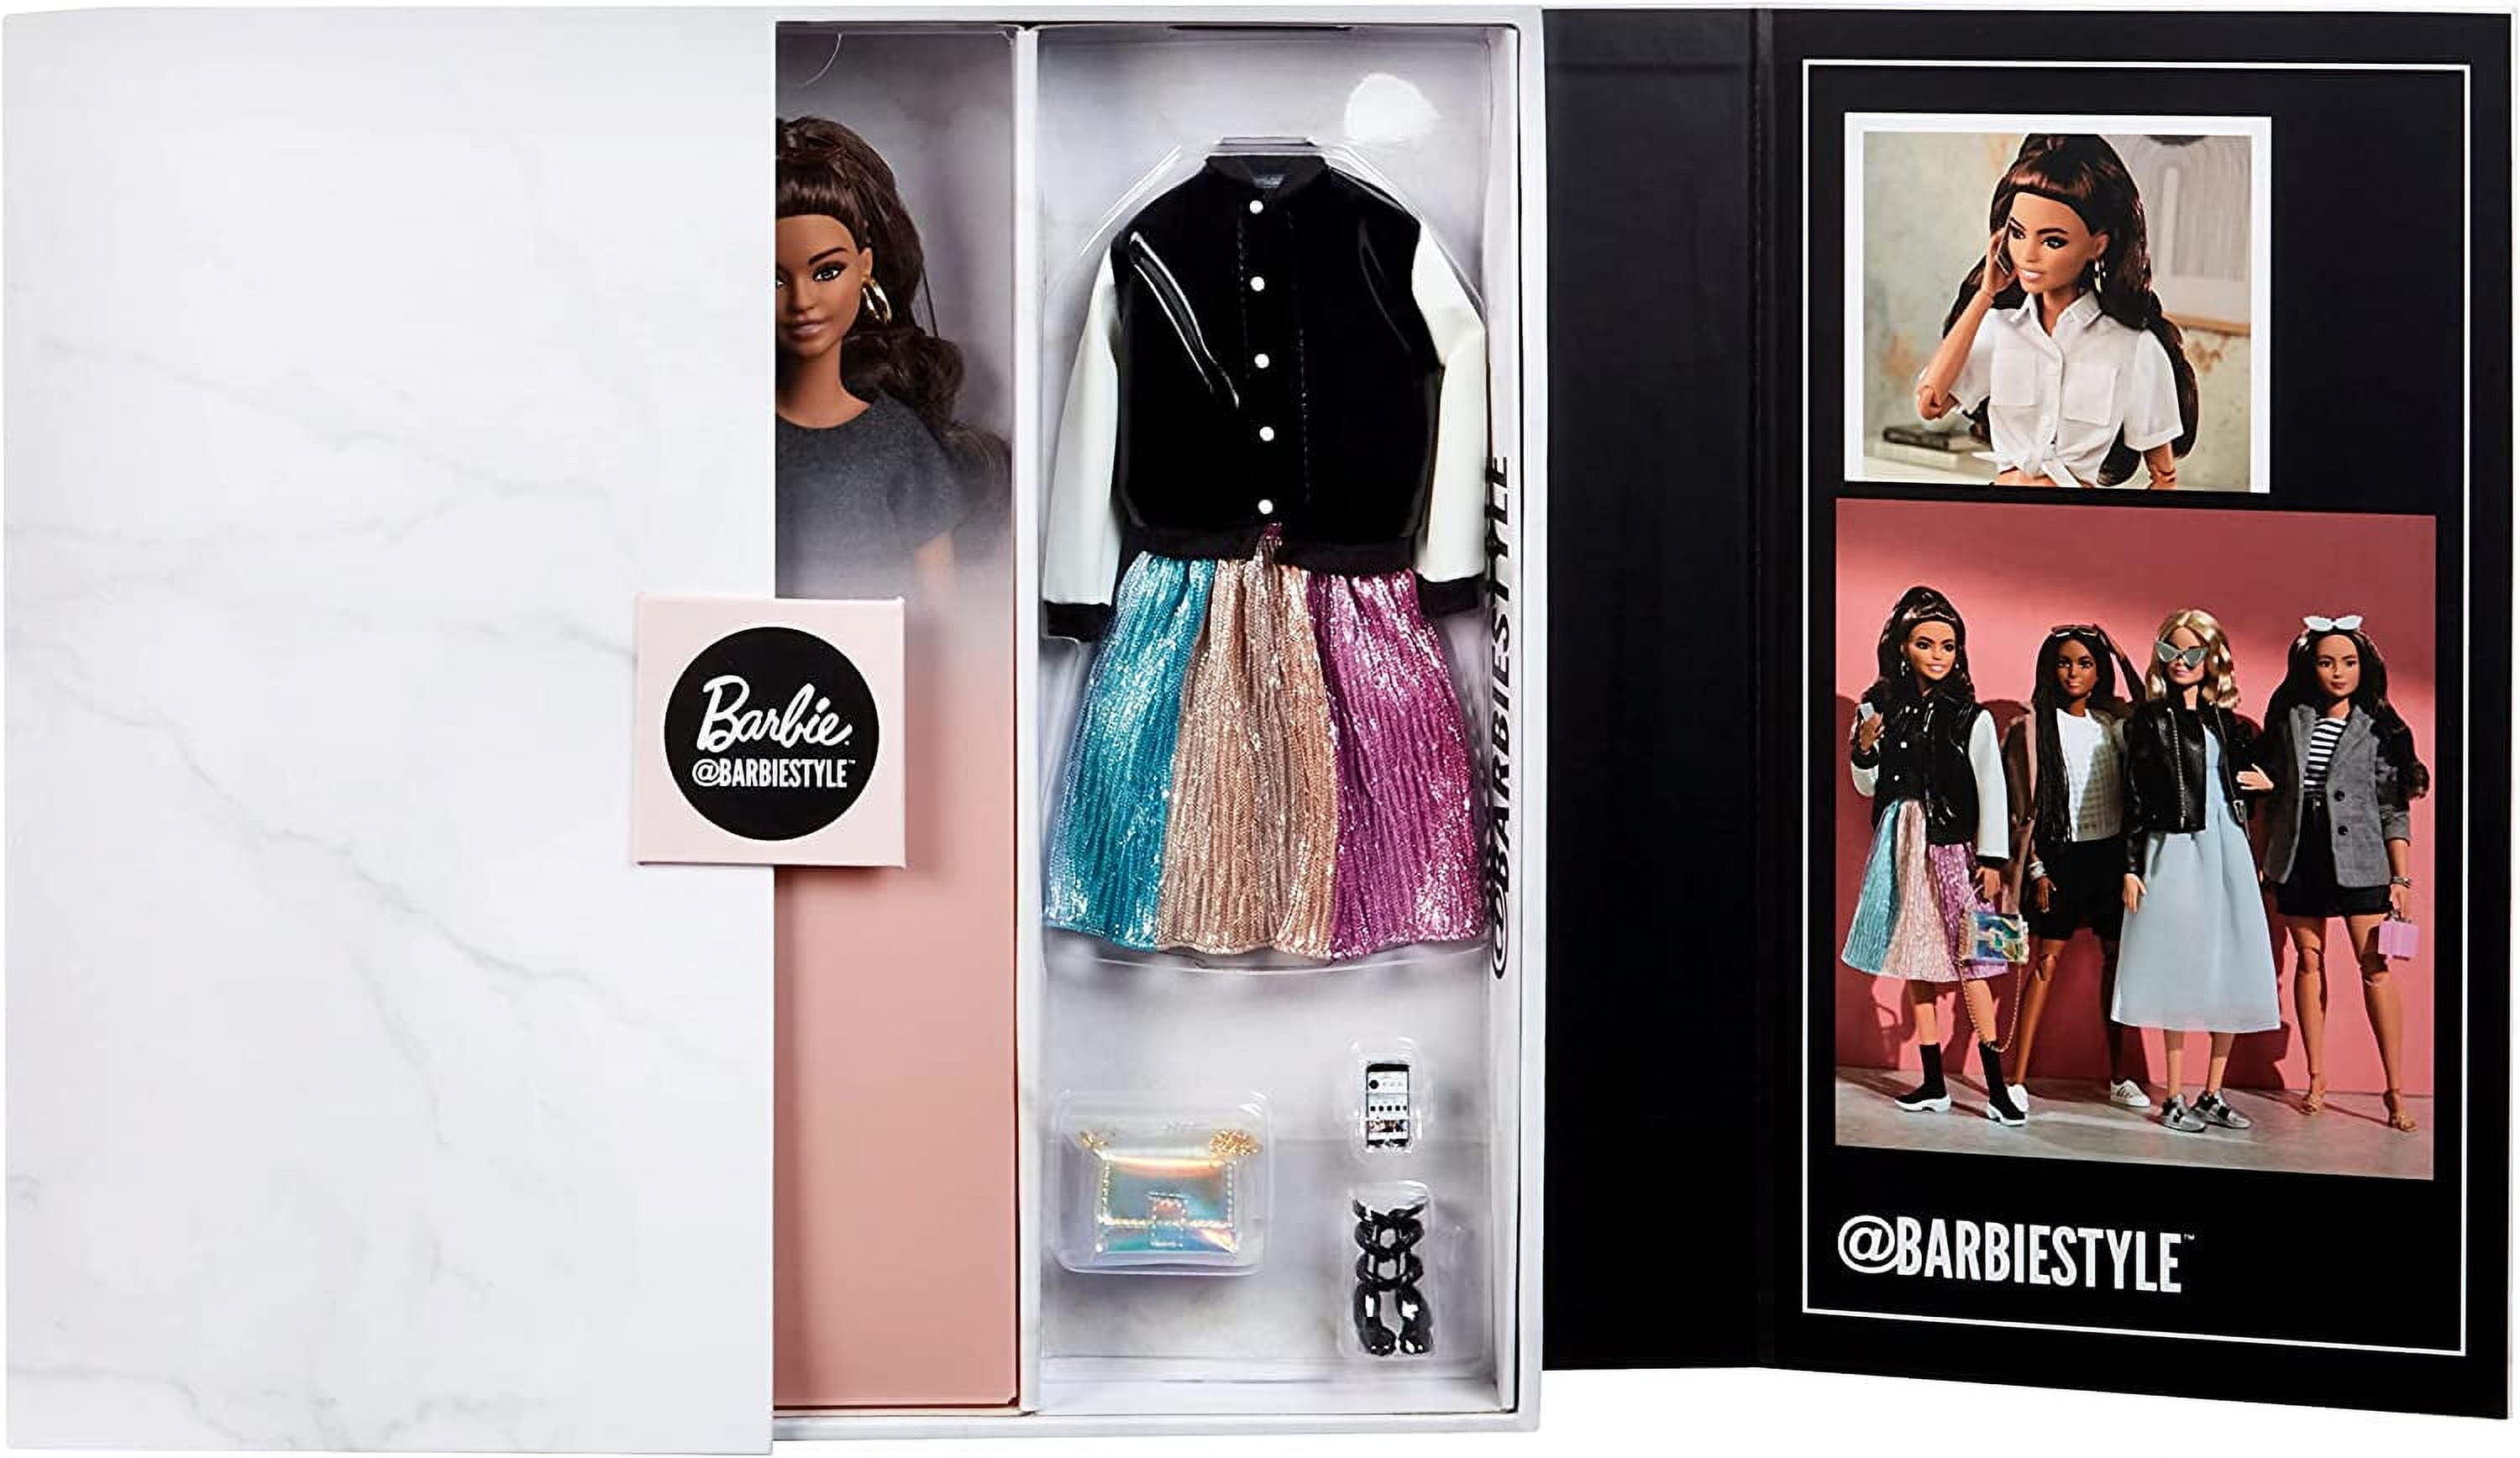 Barbie Signature Barbiestyle, Barbie Doll Limited Edition